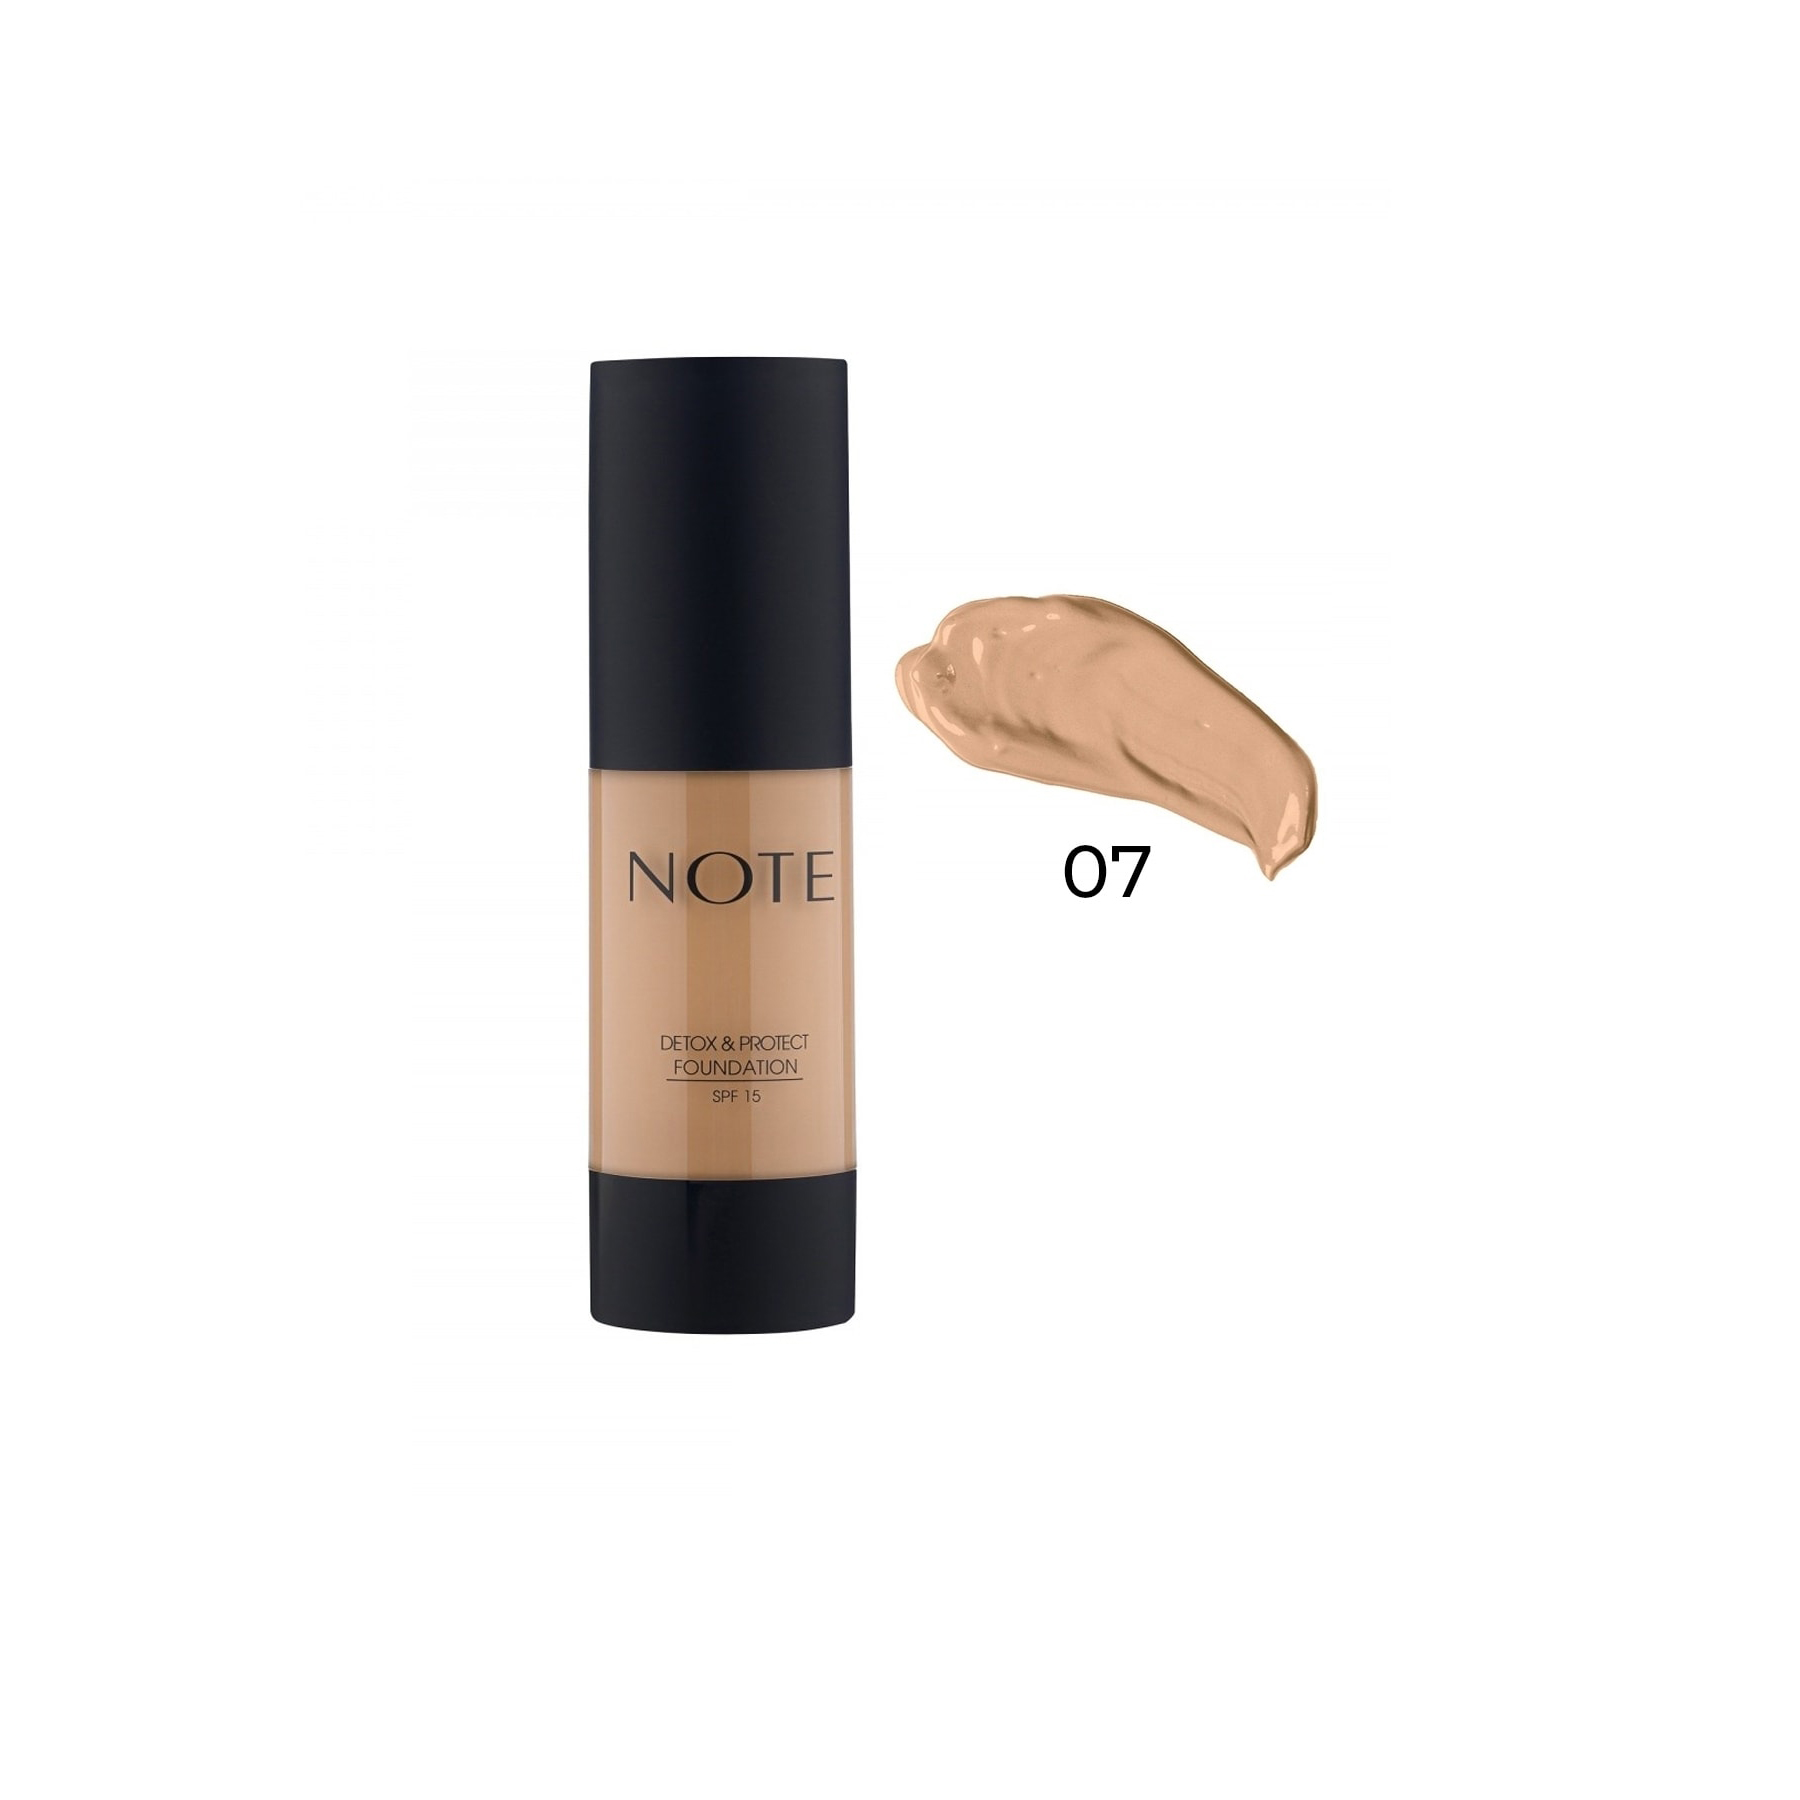 NOTE DETOX&PROTECT FOUNDATION 07